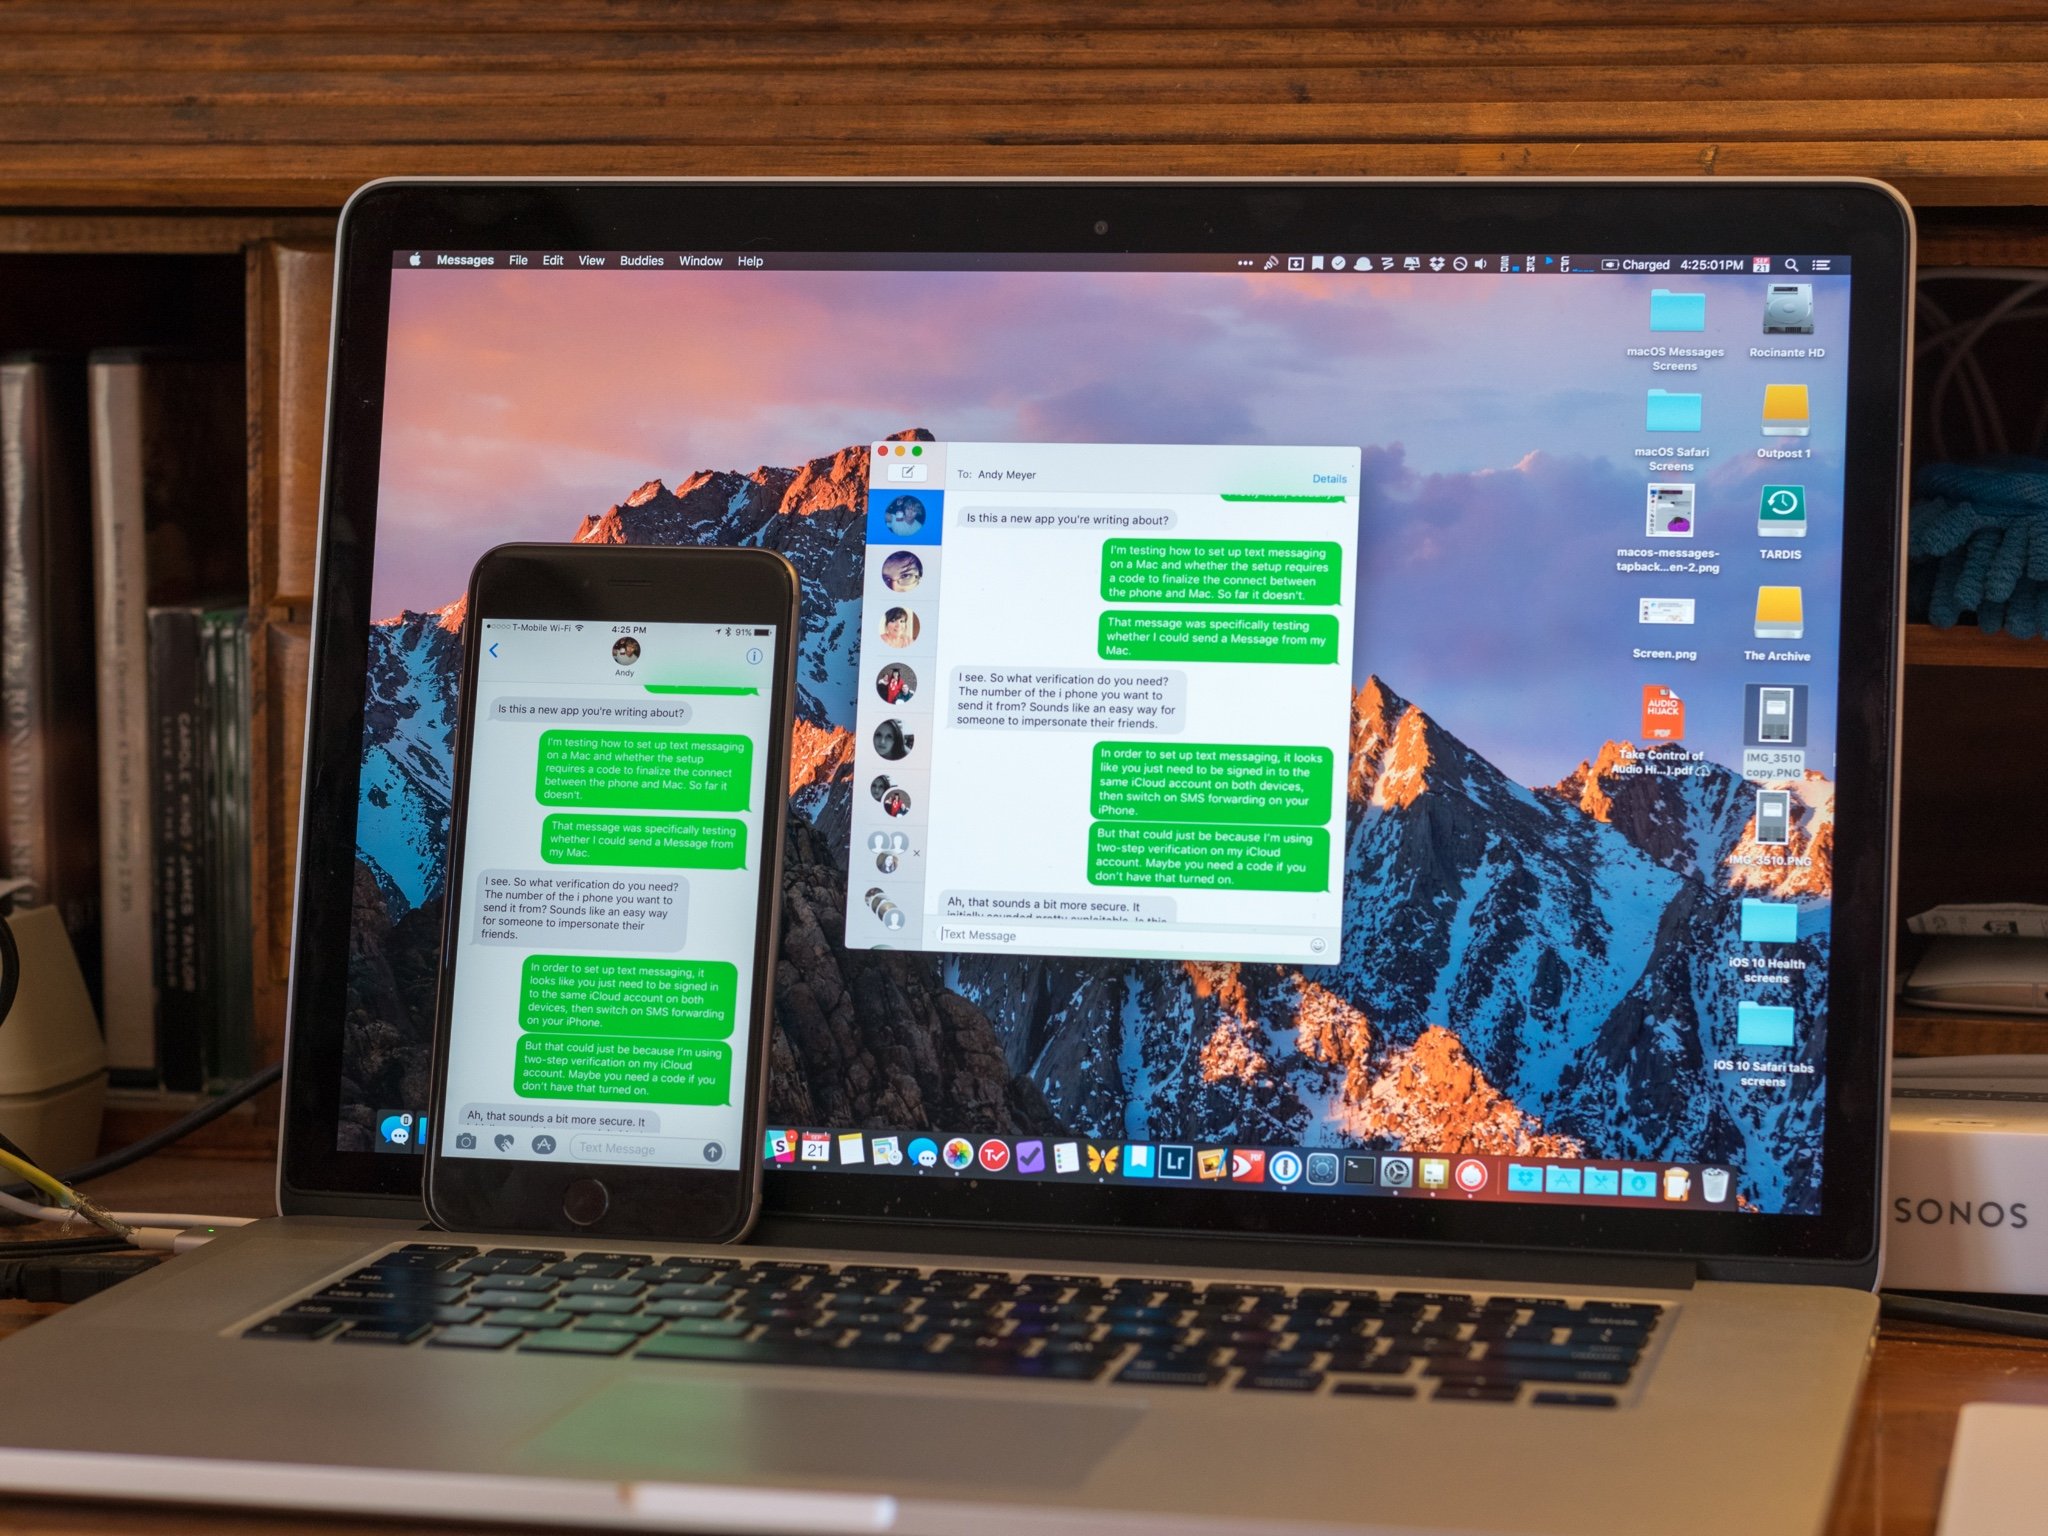 Messages on Mac